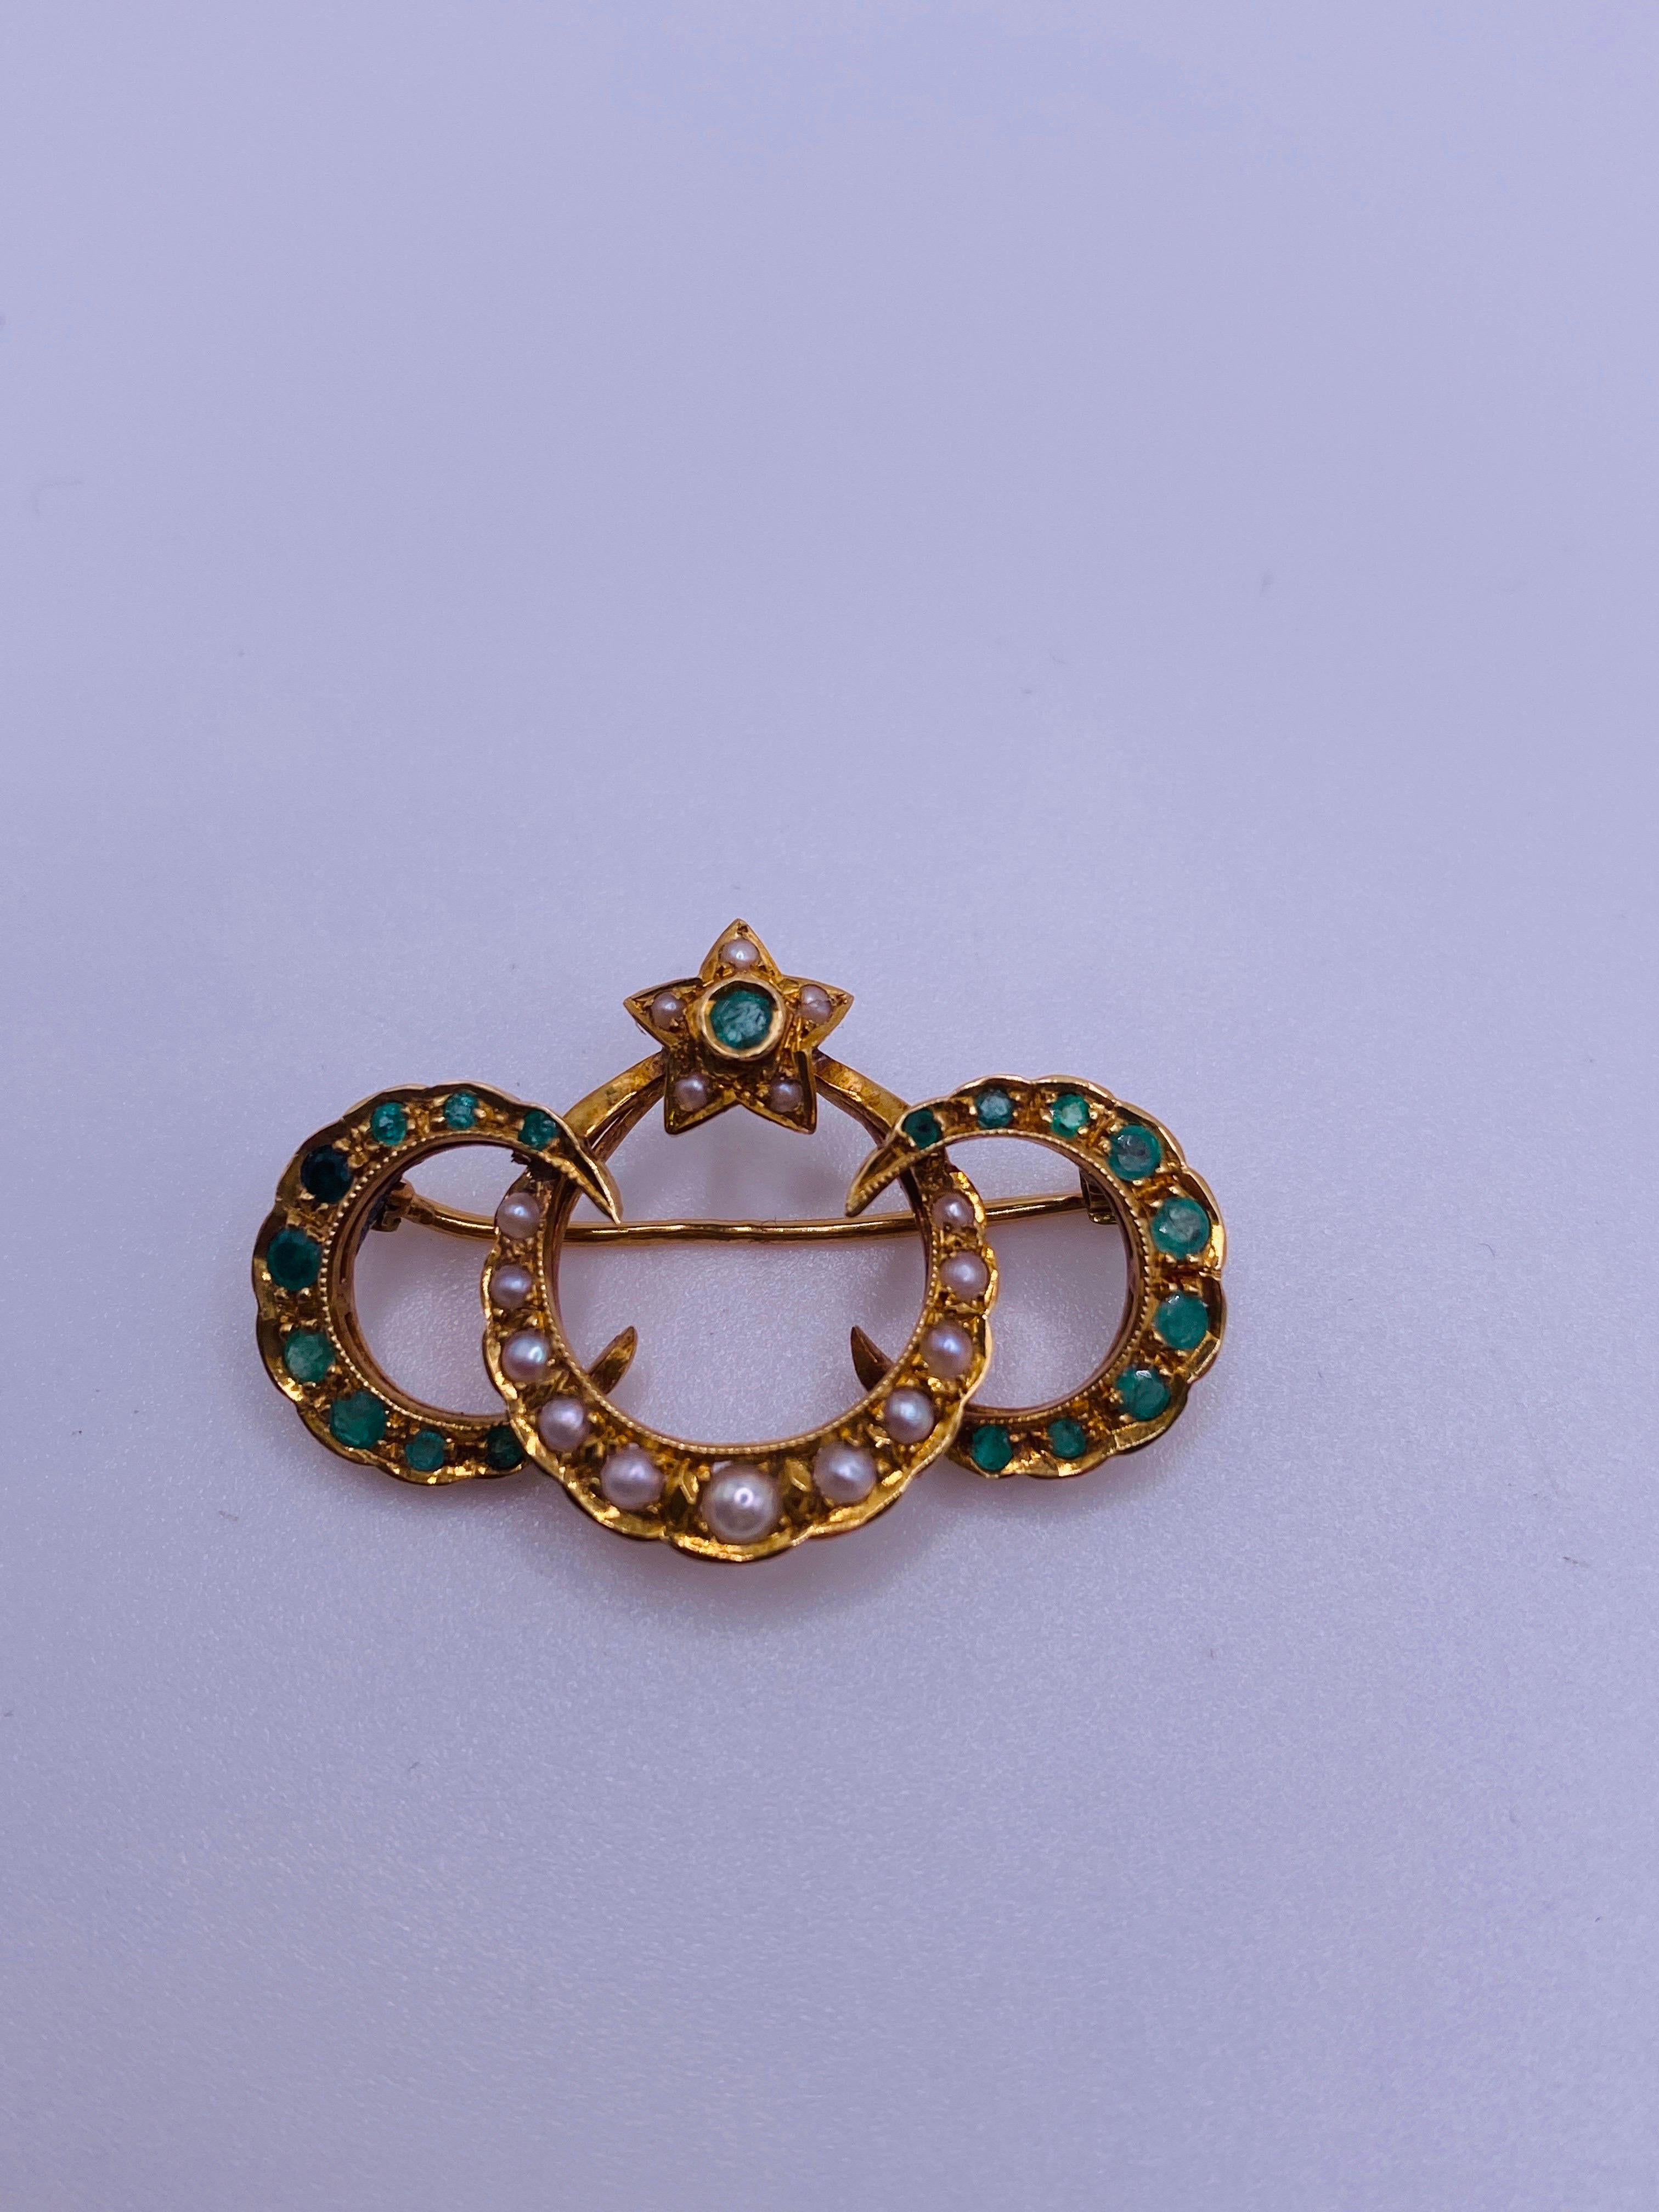 Victorian 18k yellow gold emerald and pearl brooch. 3.0Dwt/4.7gm